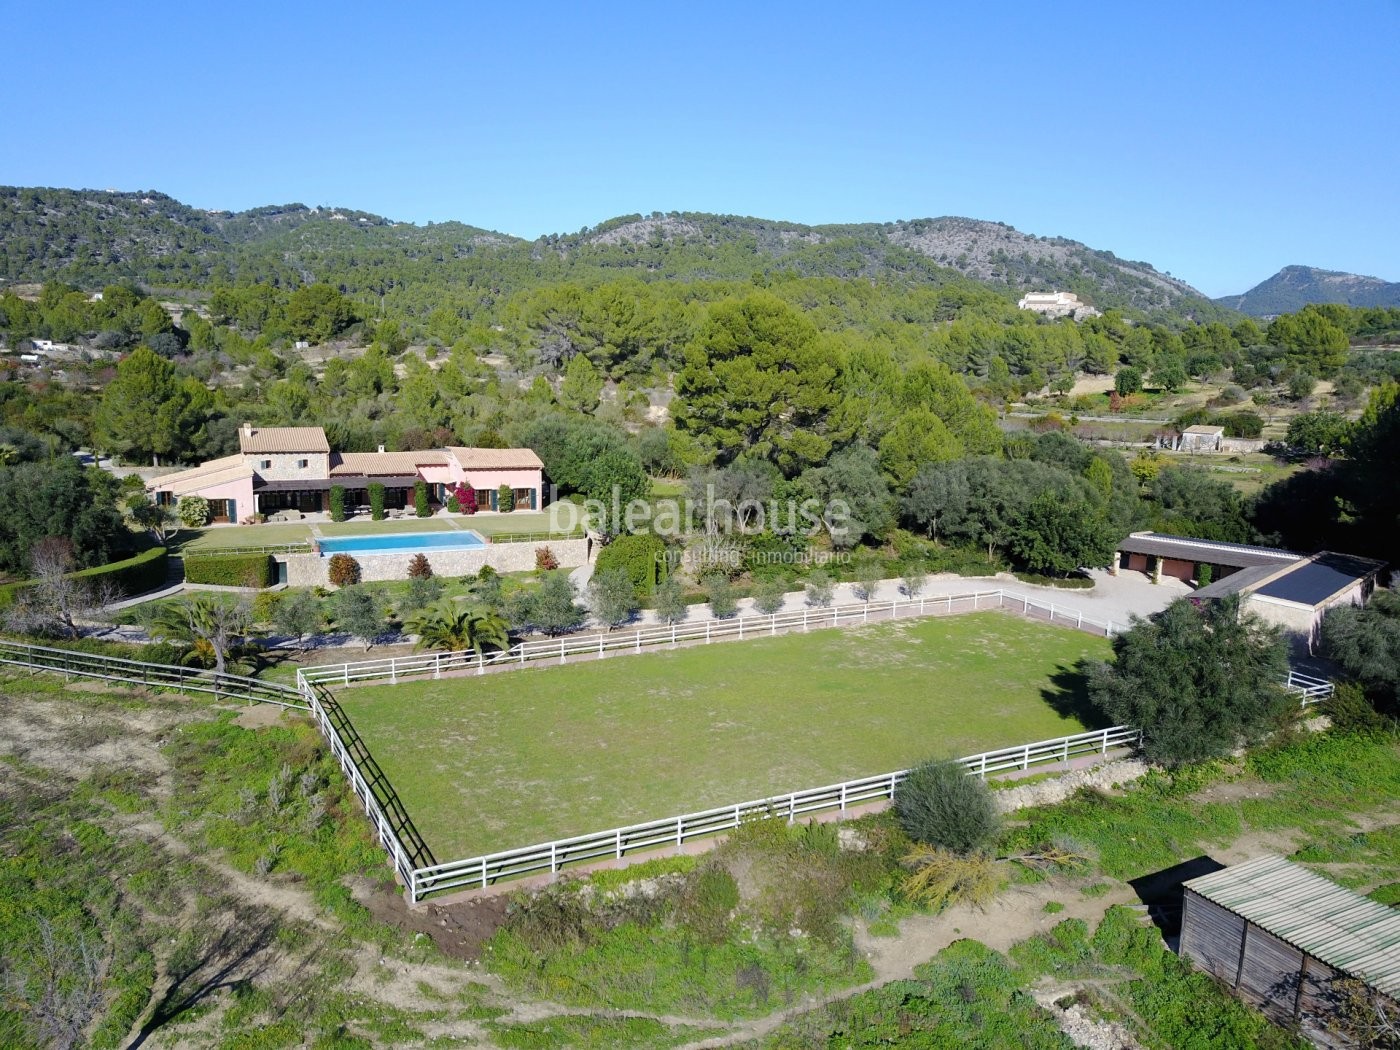 Beautiful finca with horse stables and wonderful views in Calviá